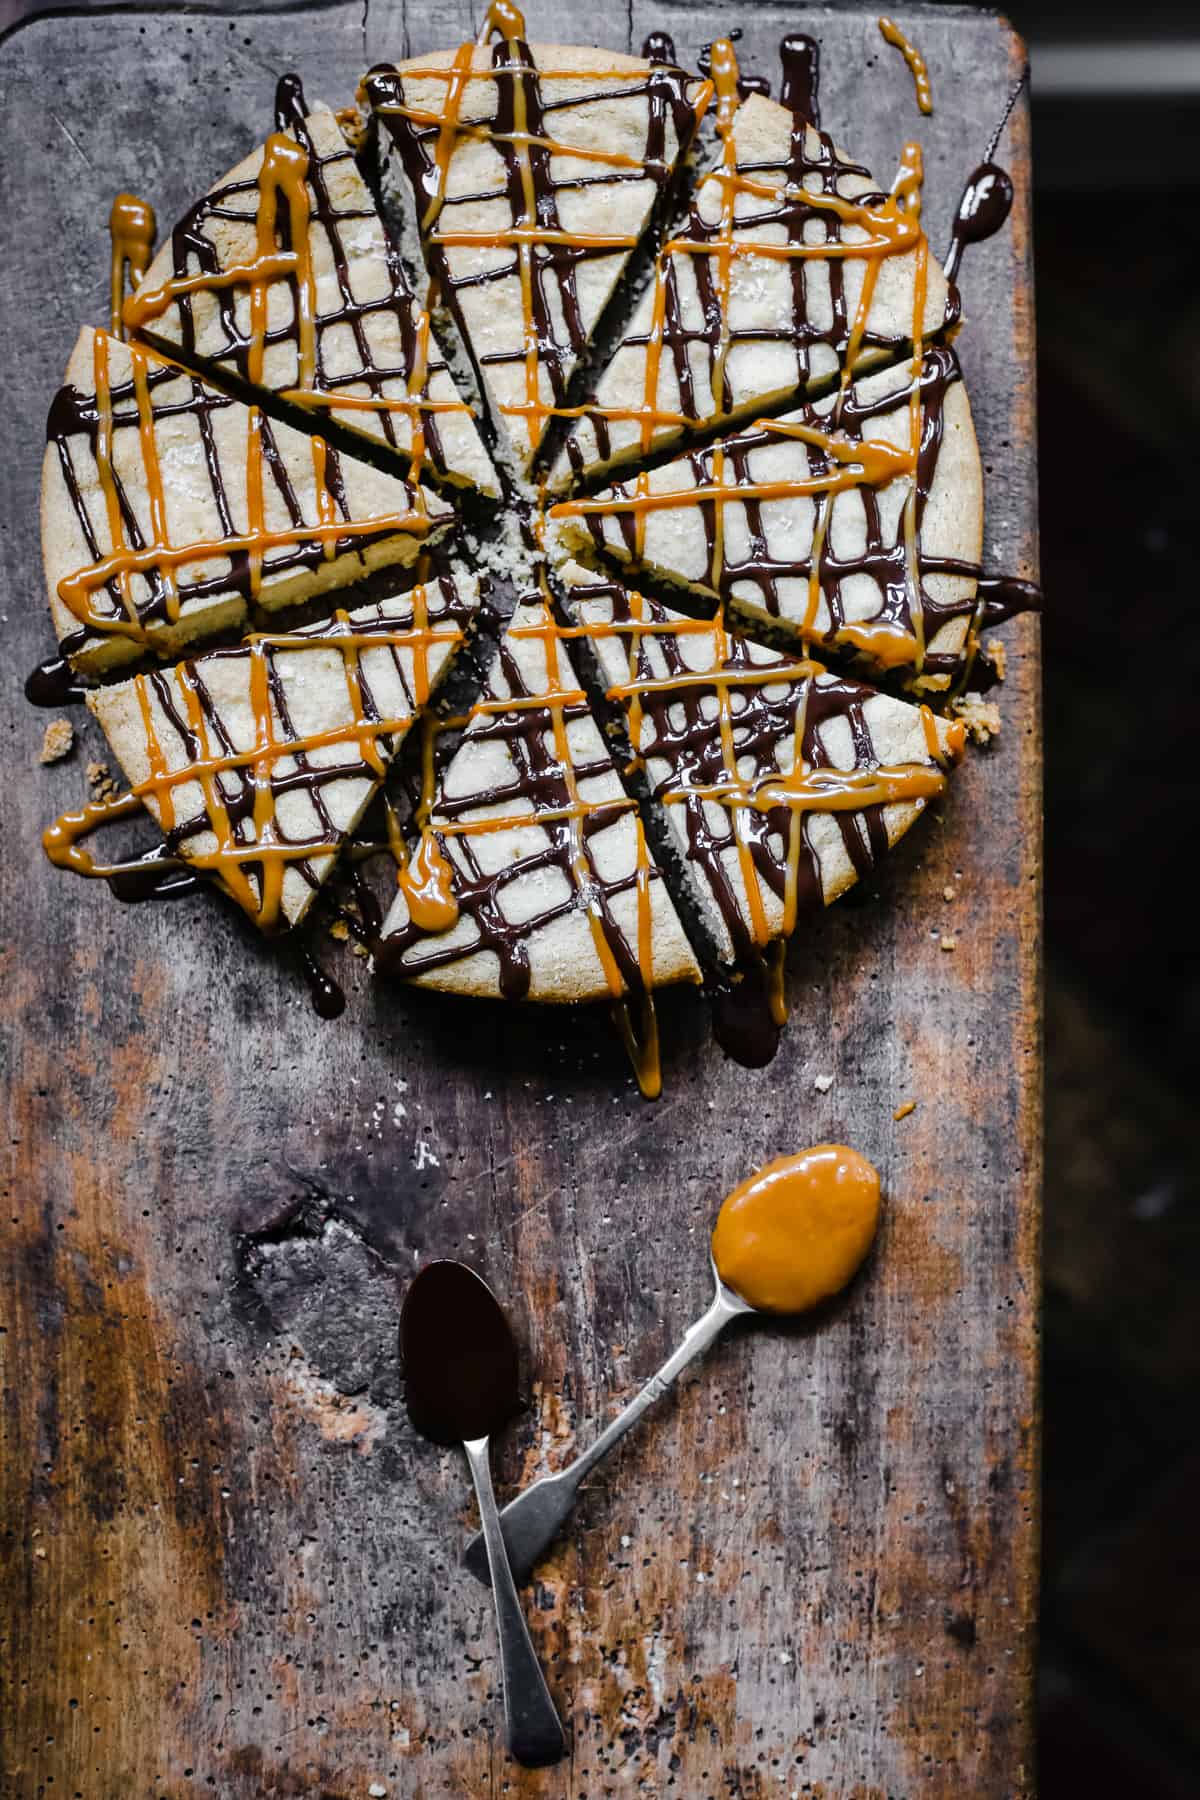 Gluten-free shortbread drizzled with chocolate and dulce de leche on wooden board